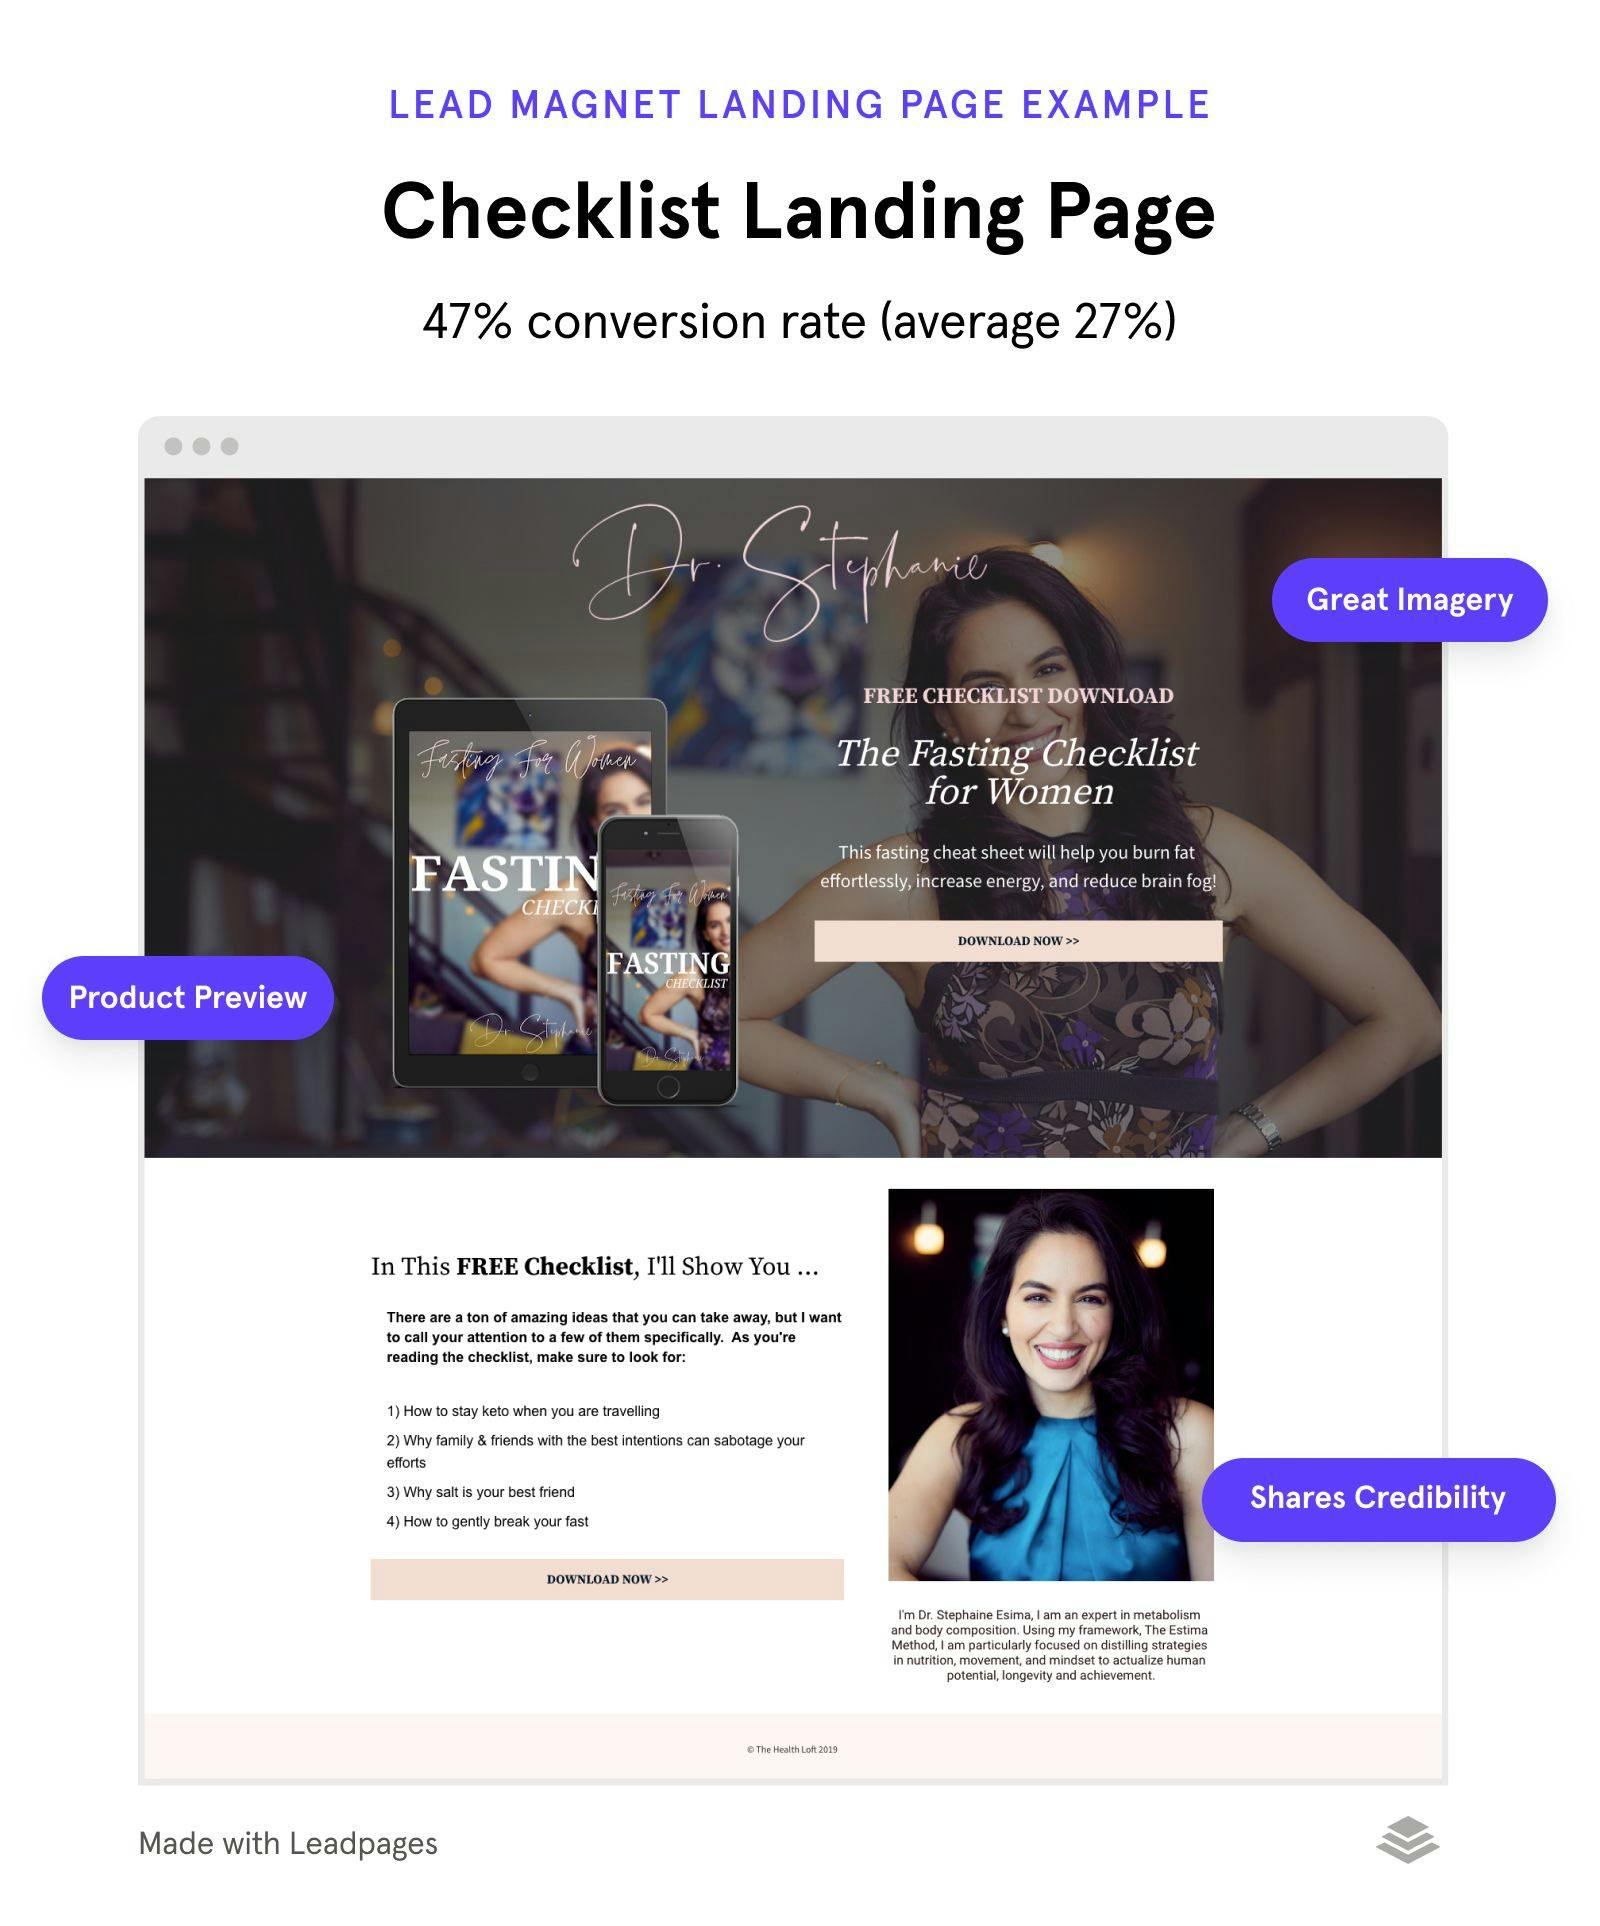 Checklist lead magnet landing page example